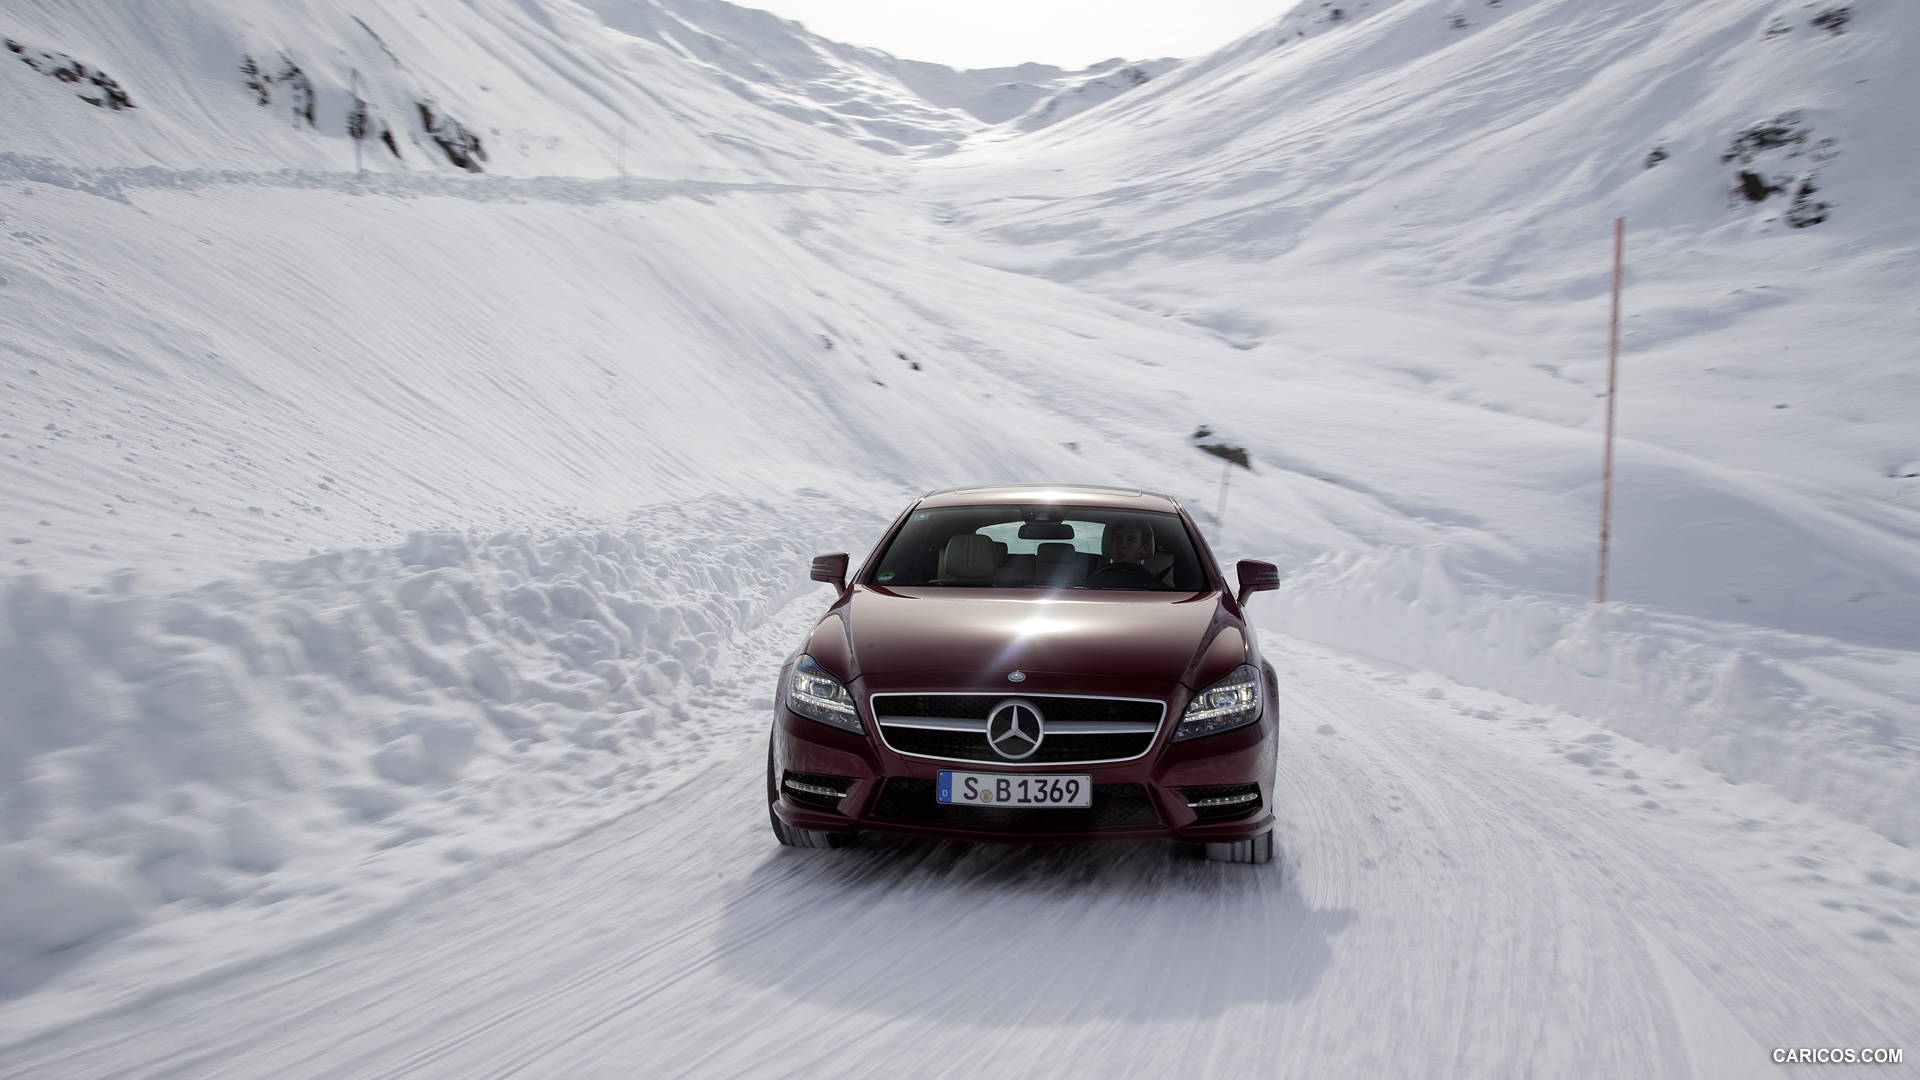 2013 Mercedes-Benz CLS 500 4MATIC Shooting Brake on Snow - Front, #154 of 184